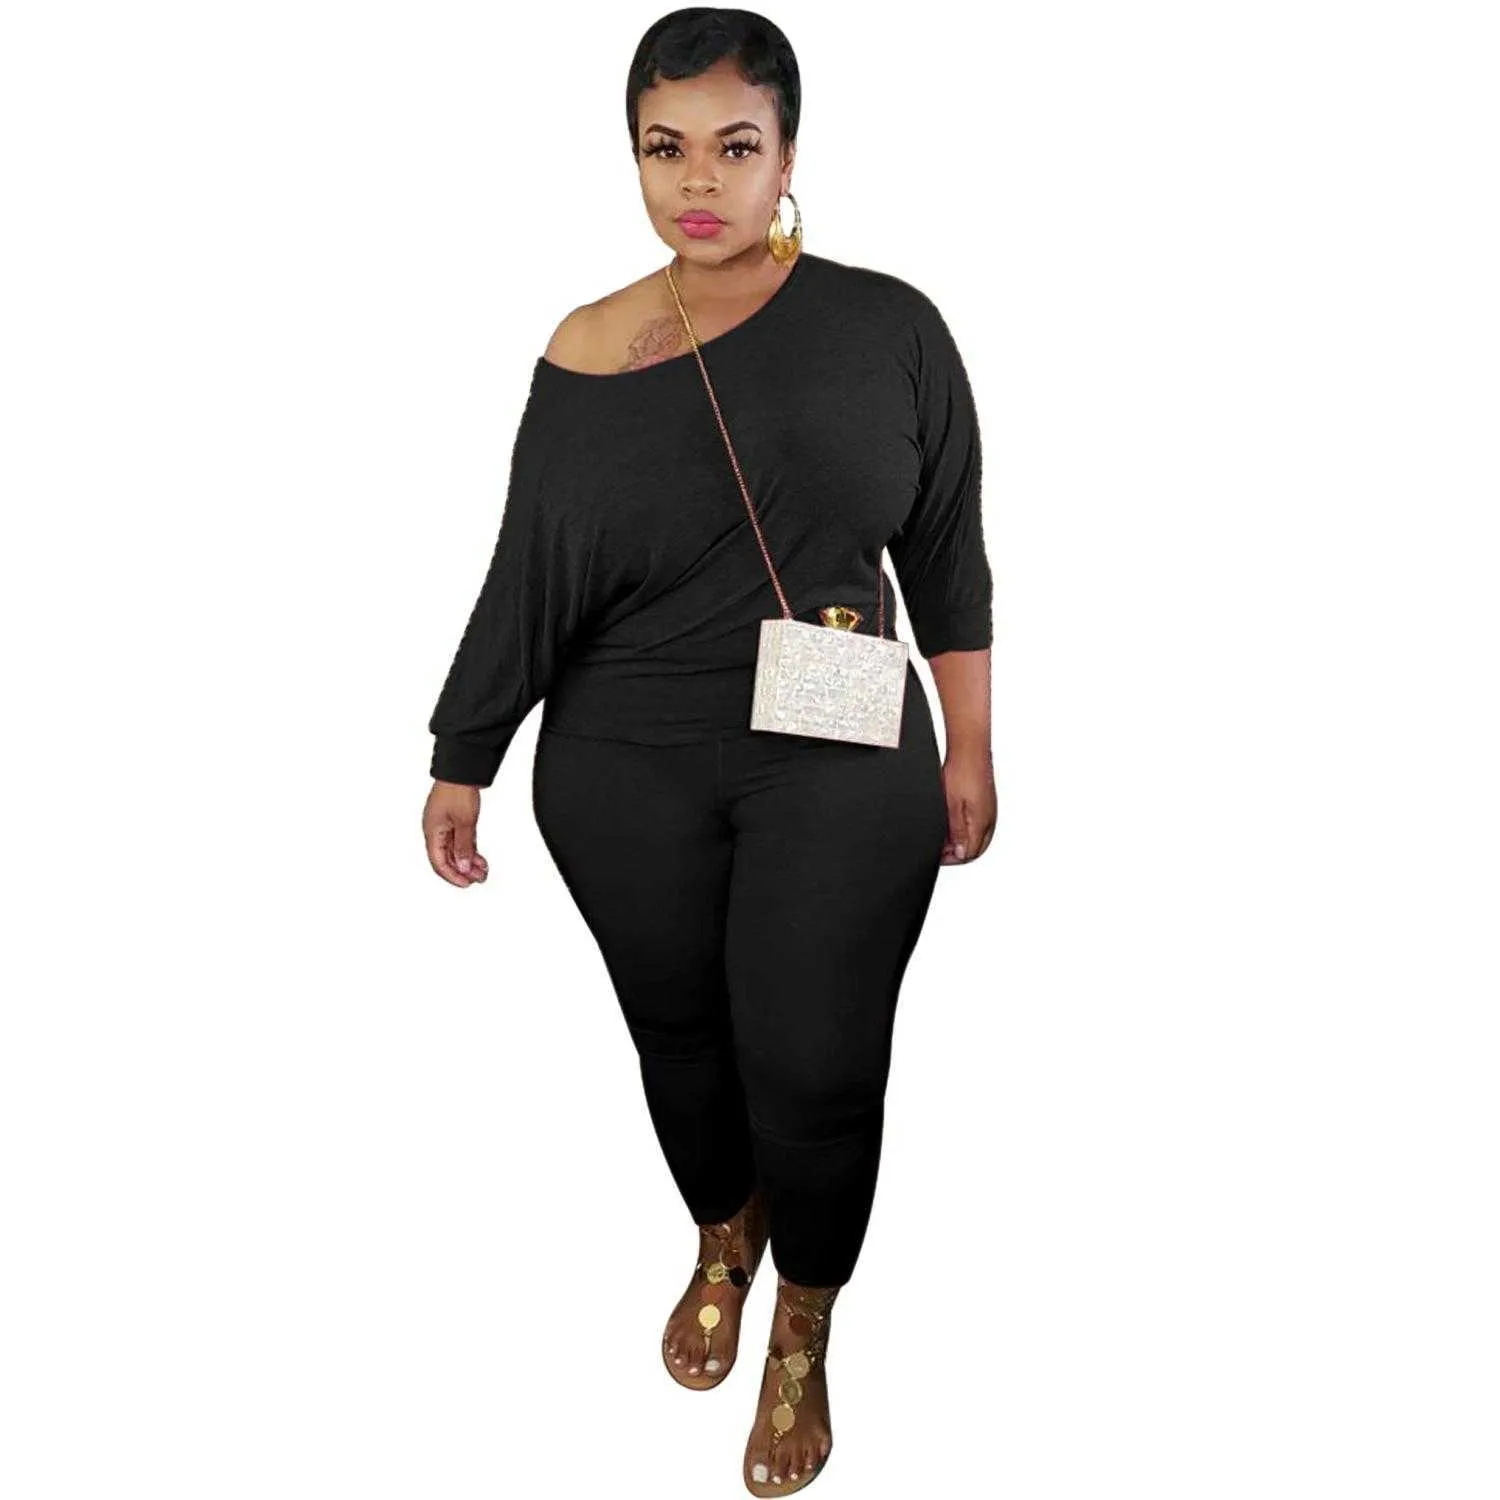 Plus Size Fashion Women's Casual Set Solid Color Off Shoulder Long Sleeve Top and Long Pant Bodycon Skinny Tracksuits